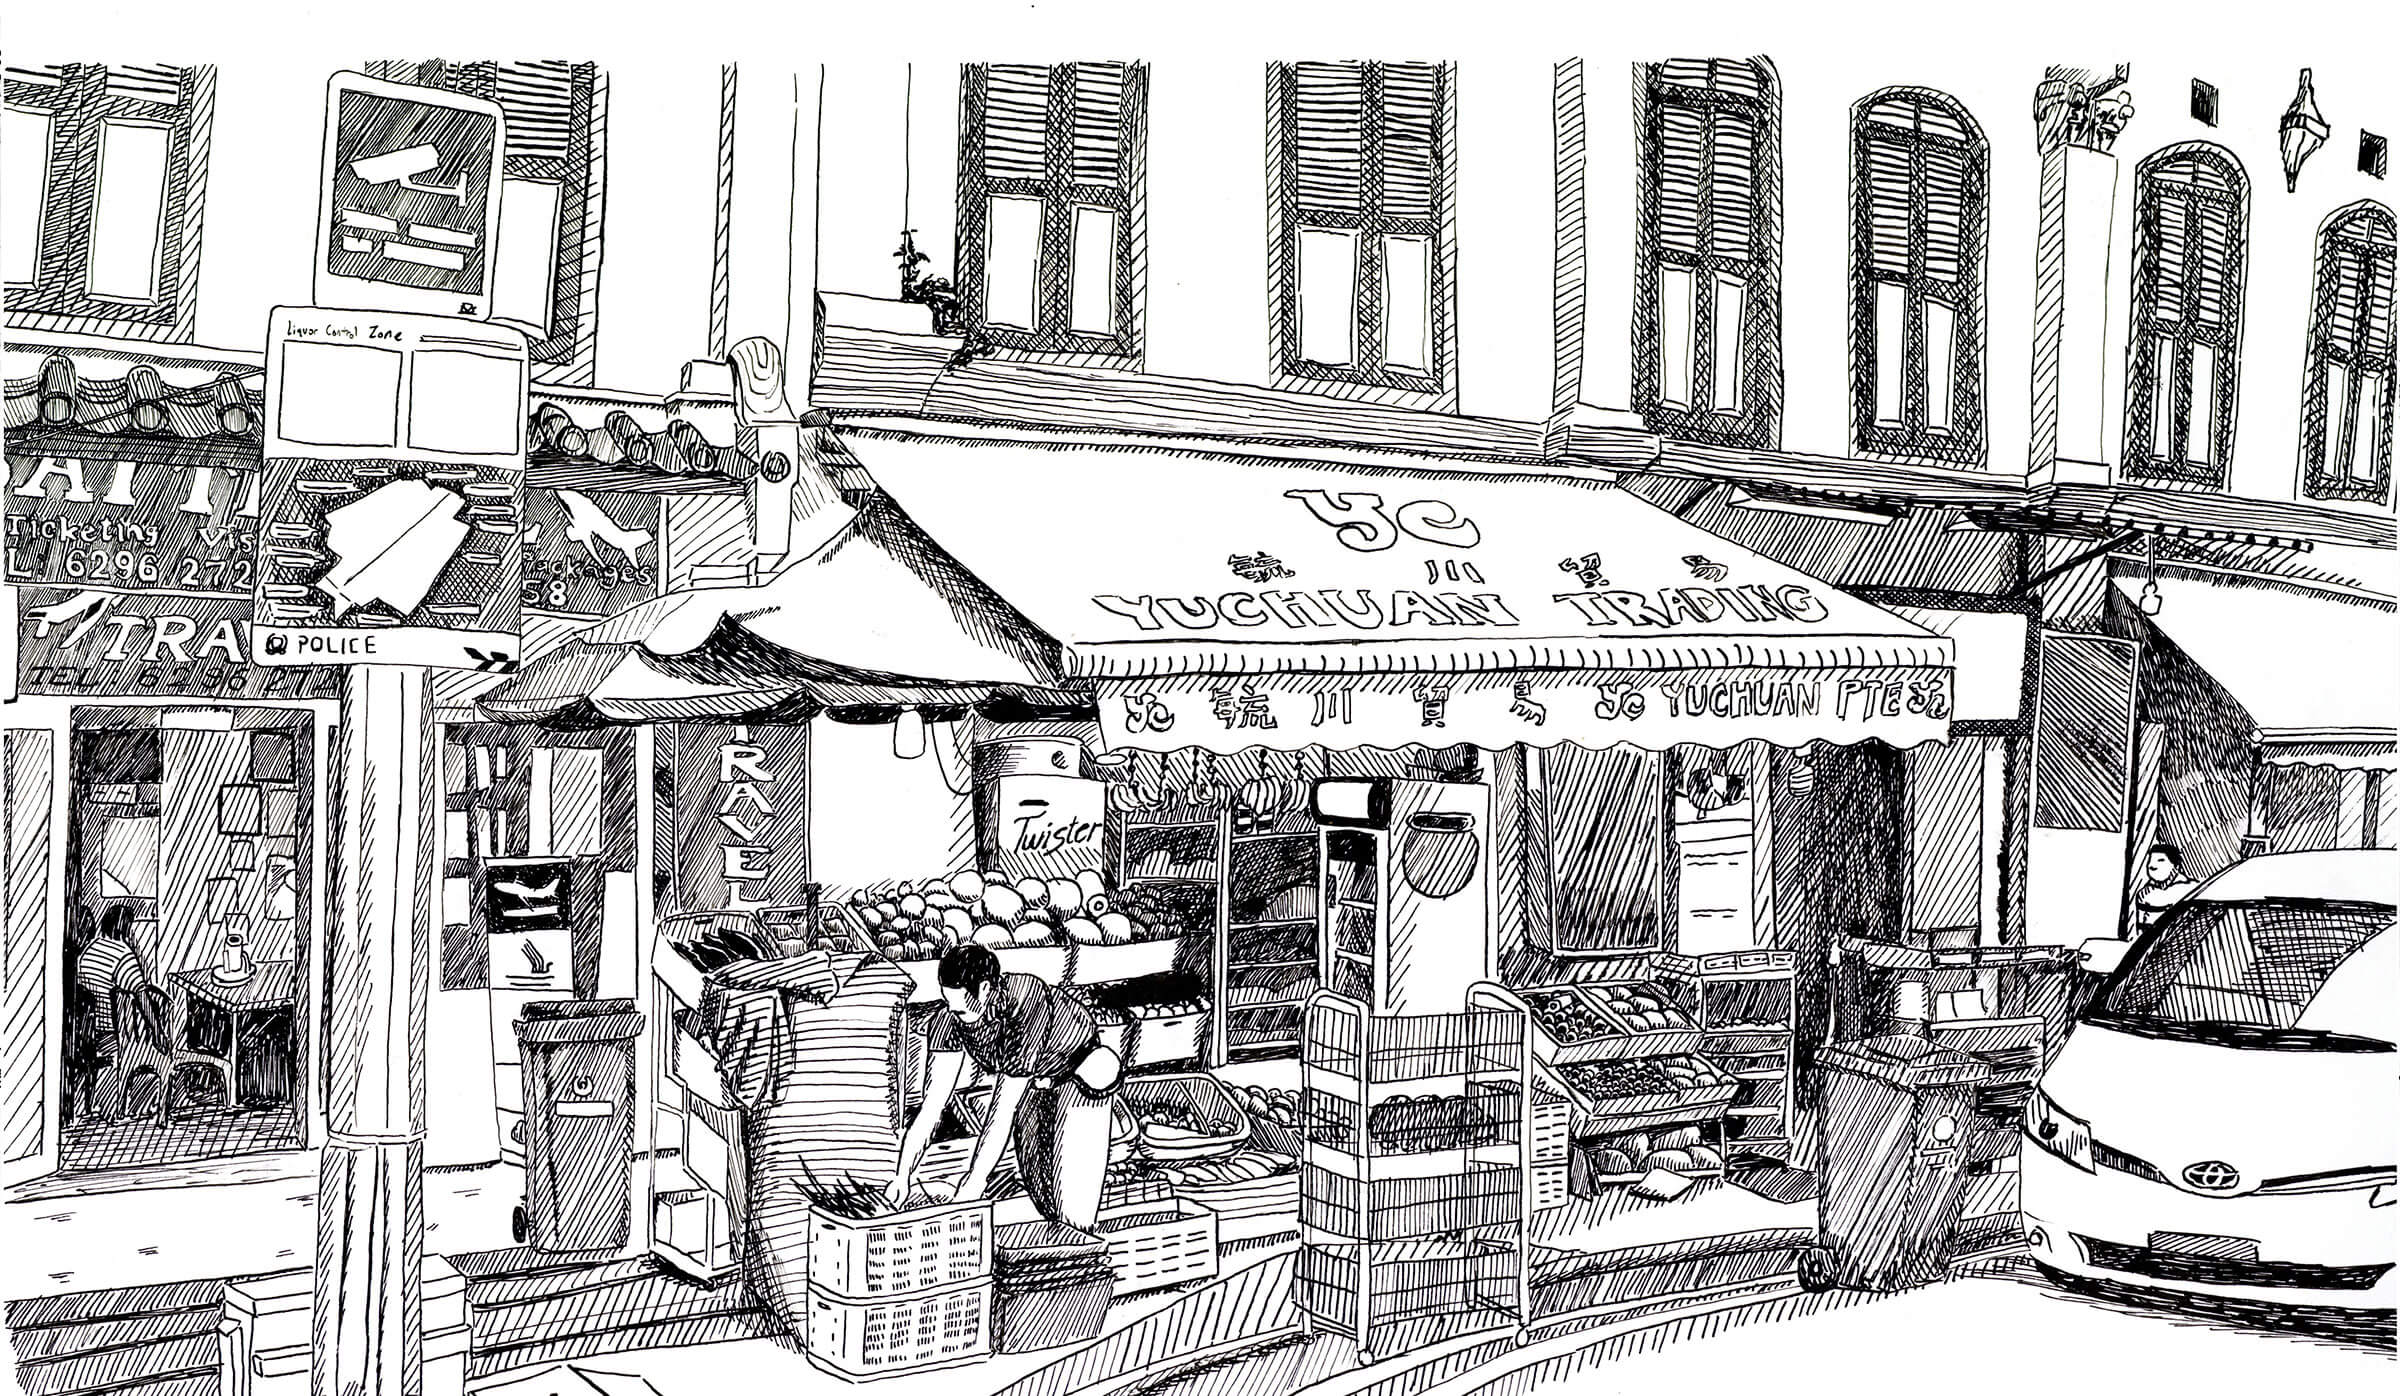 Black-and-white sketch of a grocer stocking produce at a market on the ground floor of a low-rise building.